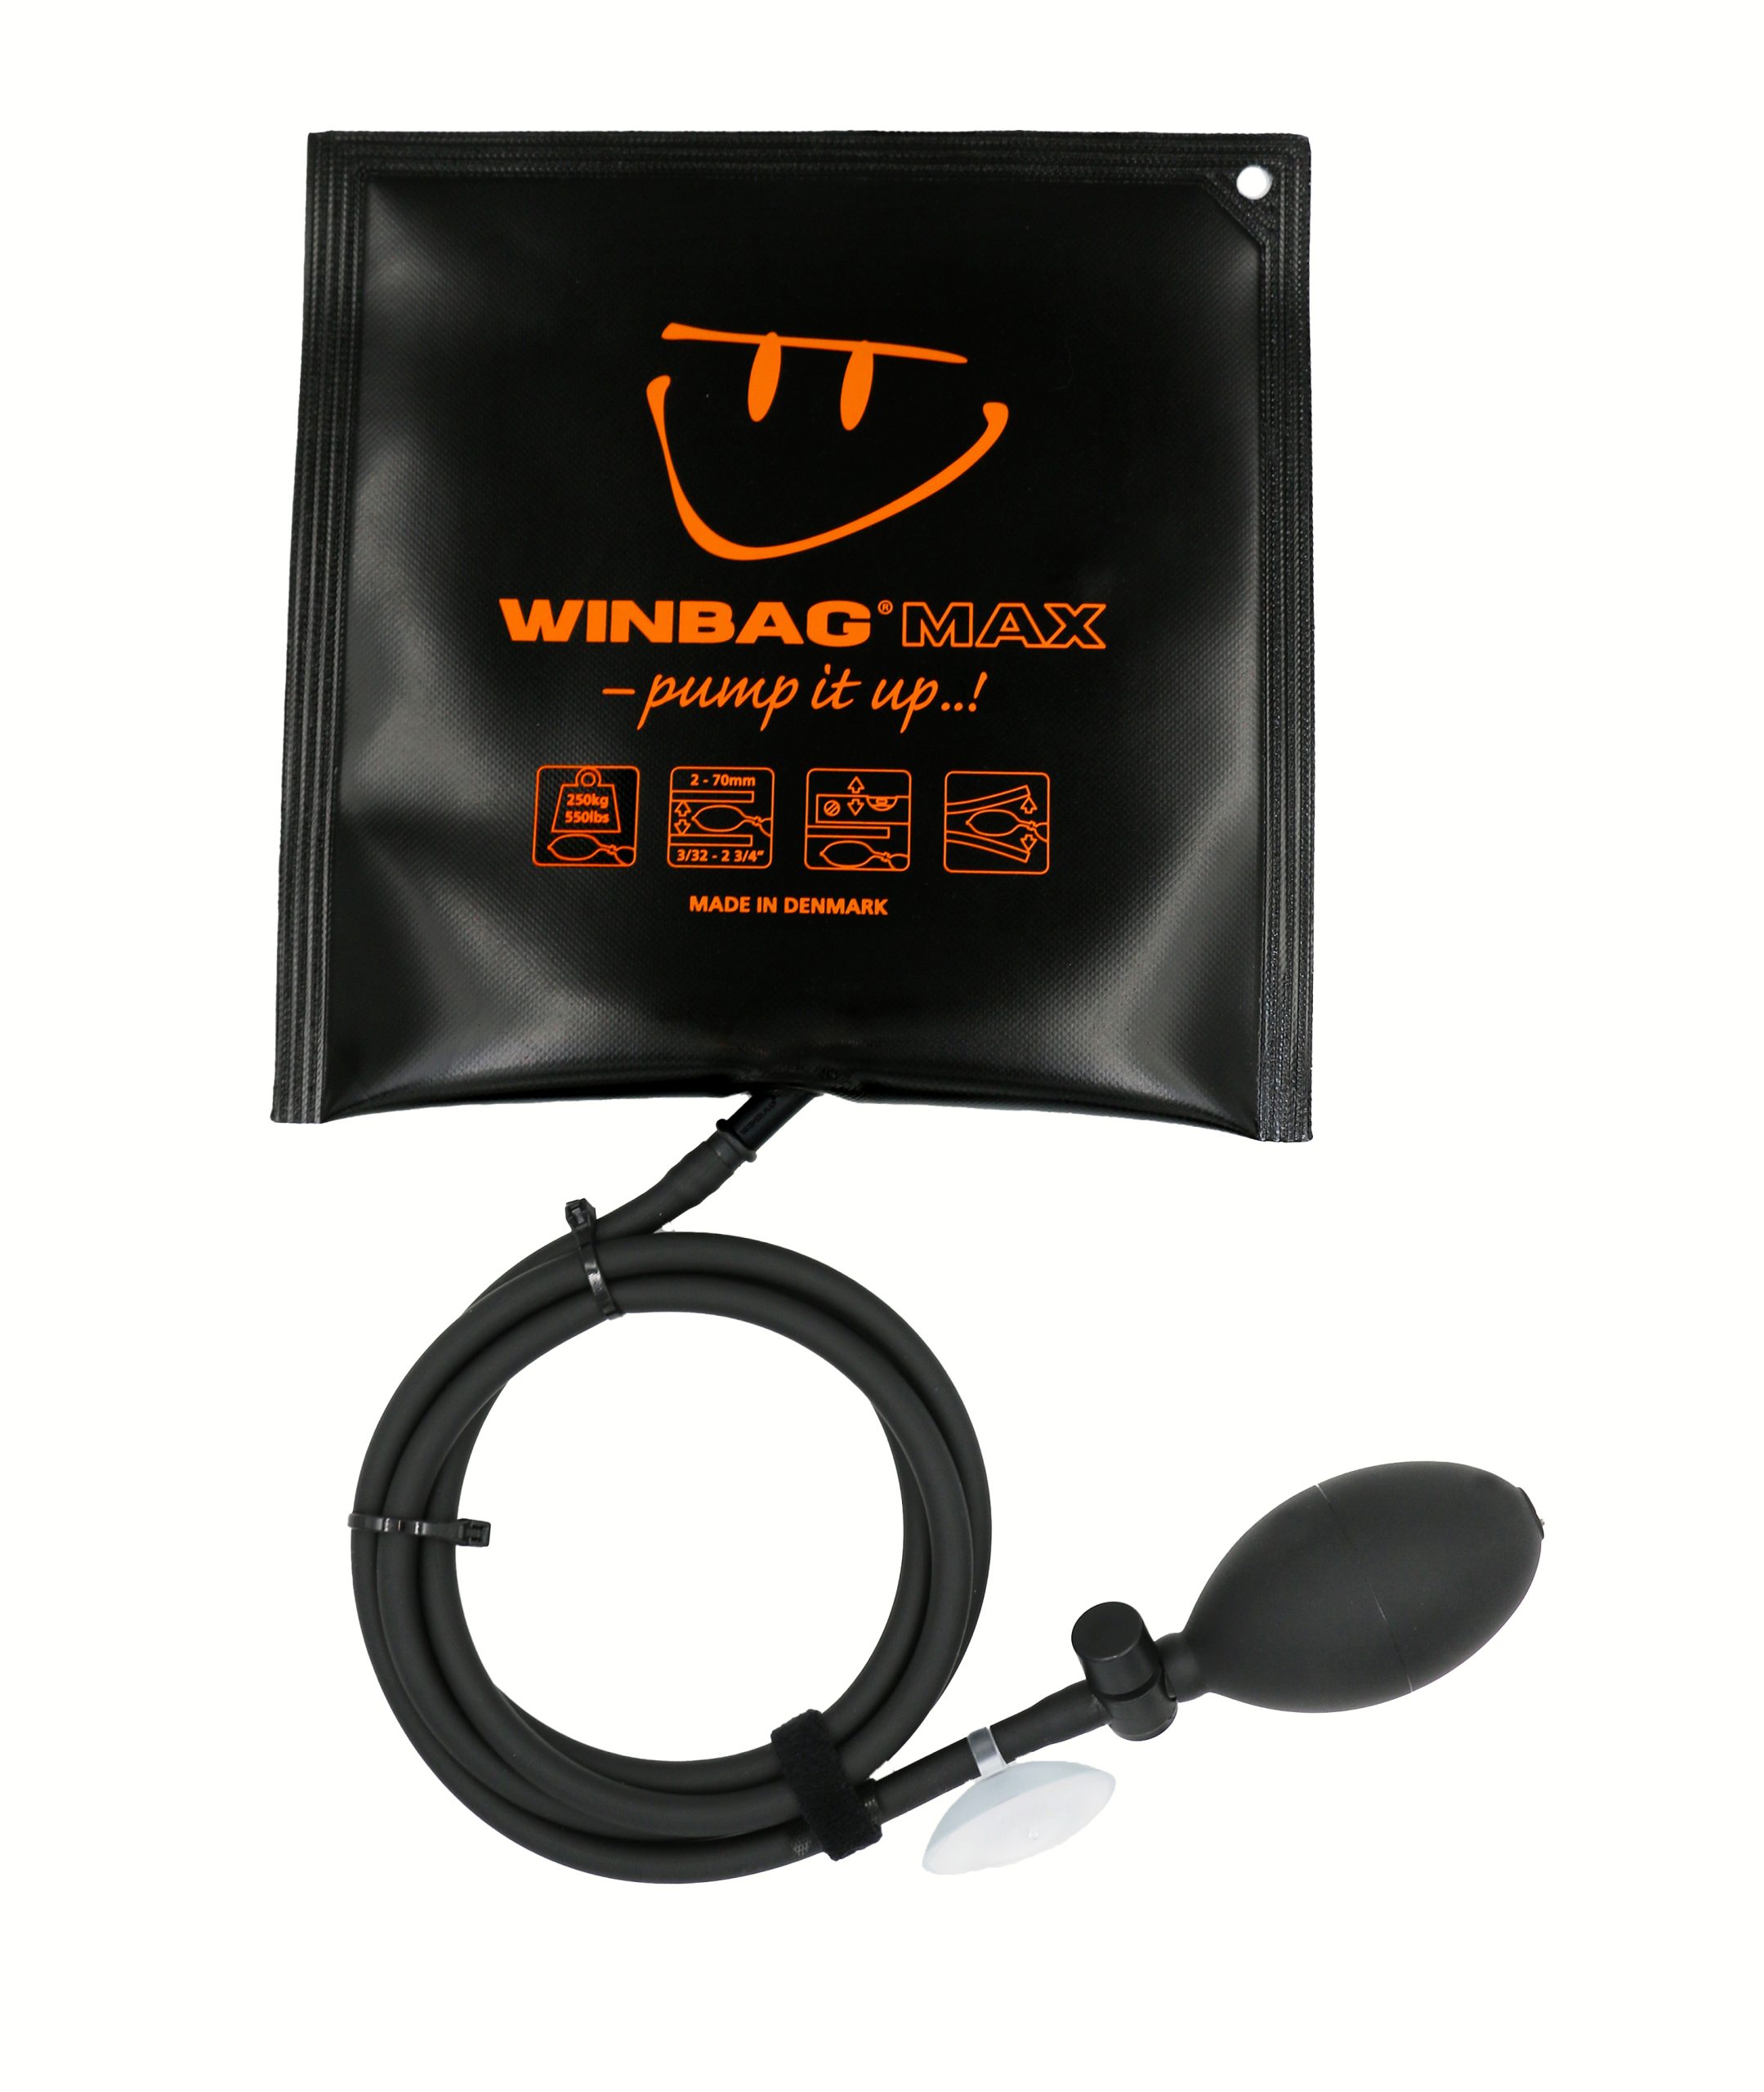 https://www.shims.com/wp-content/uploads/2023/05/Winbag-MAX-Front-scaled.jpg